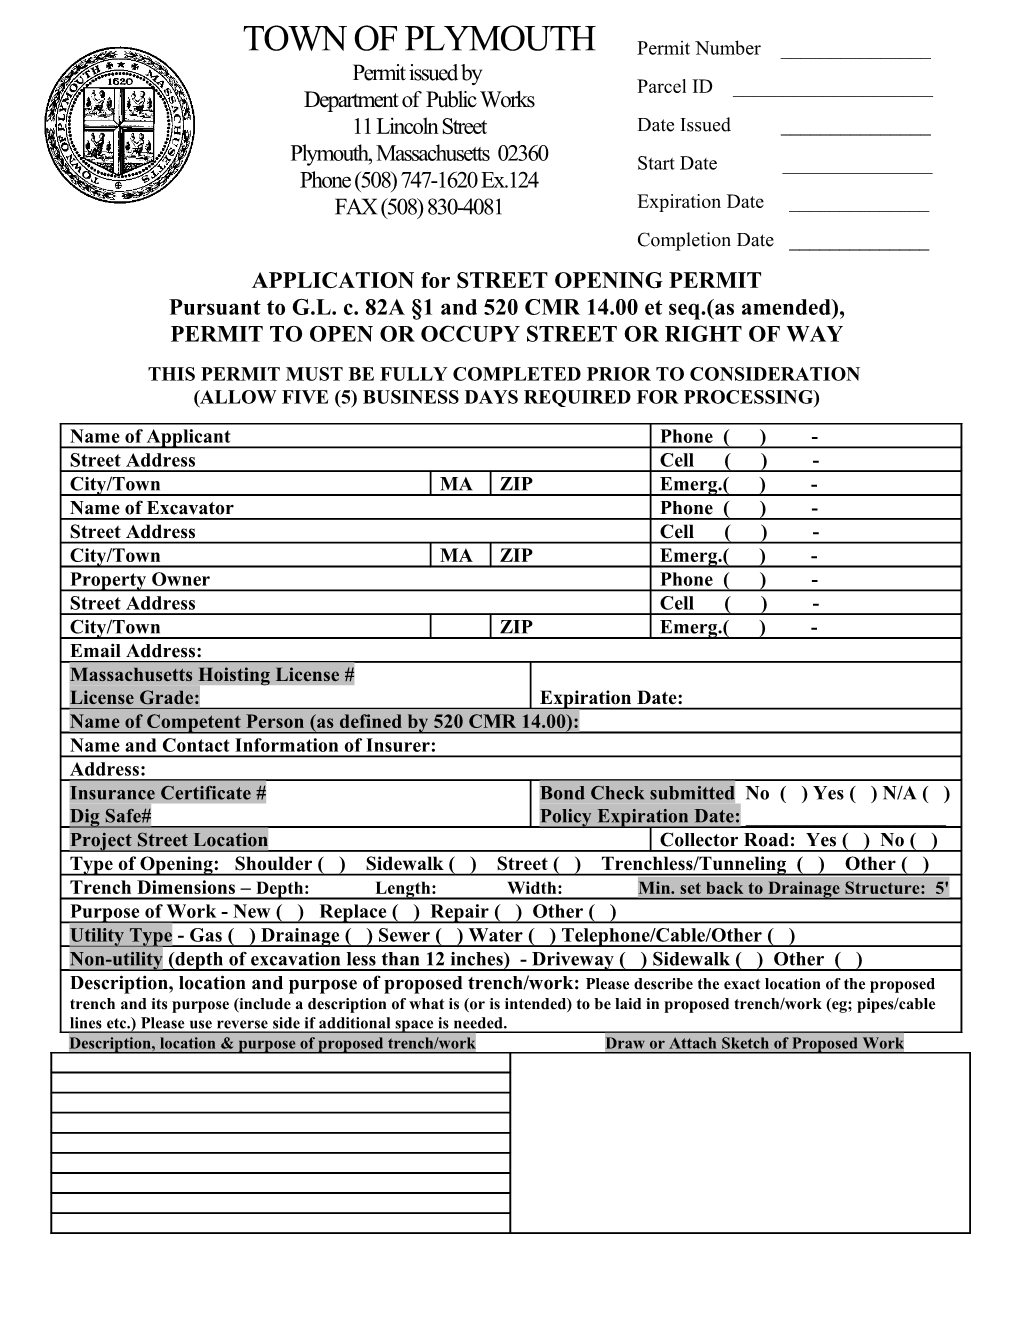 TOWN of PLYMOUTH Permit Issued By